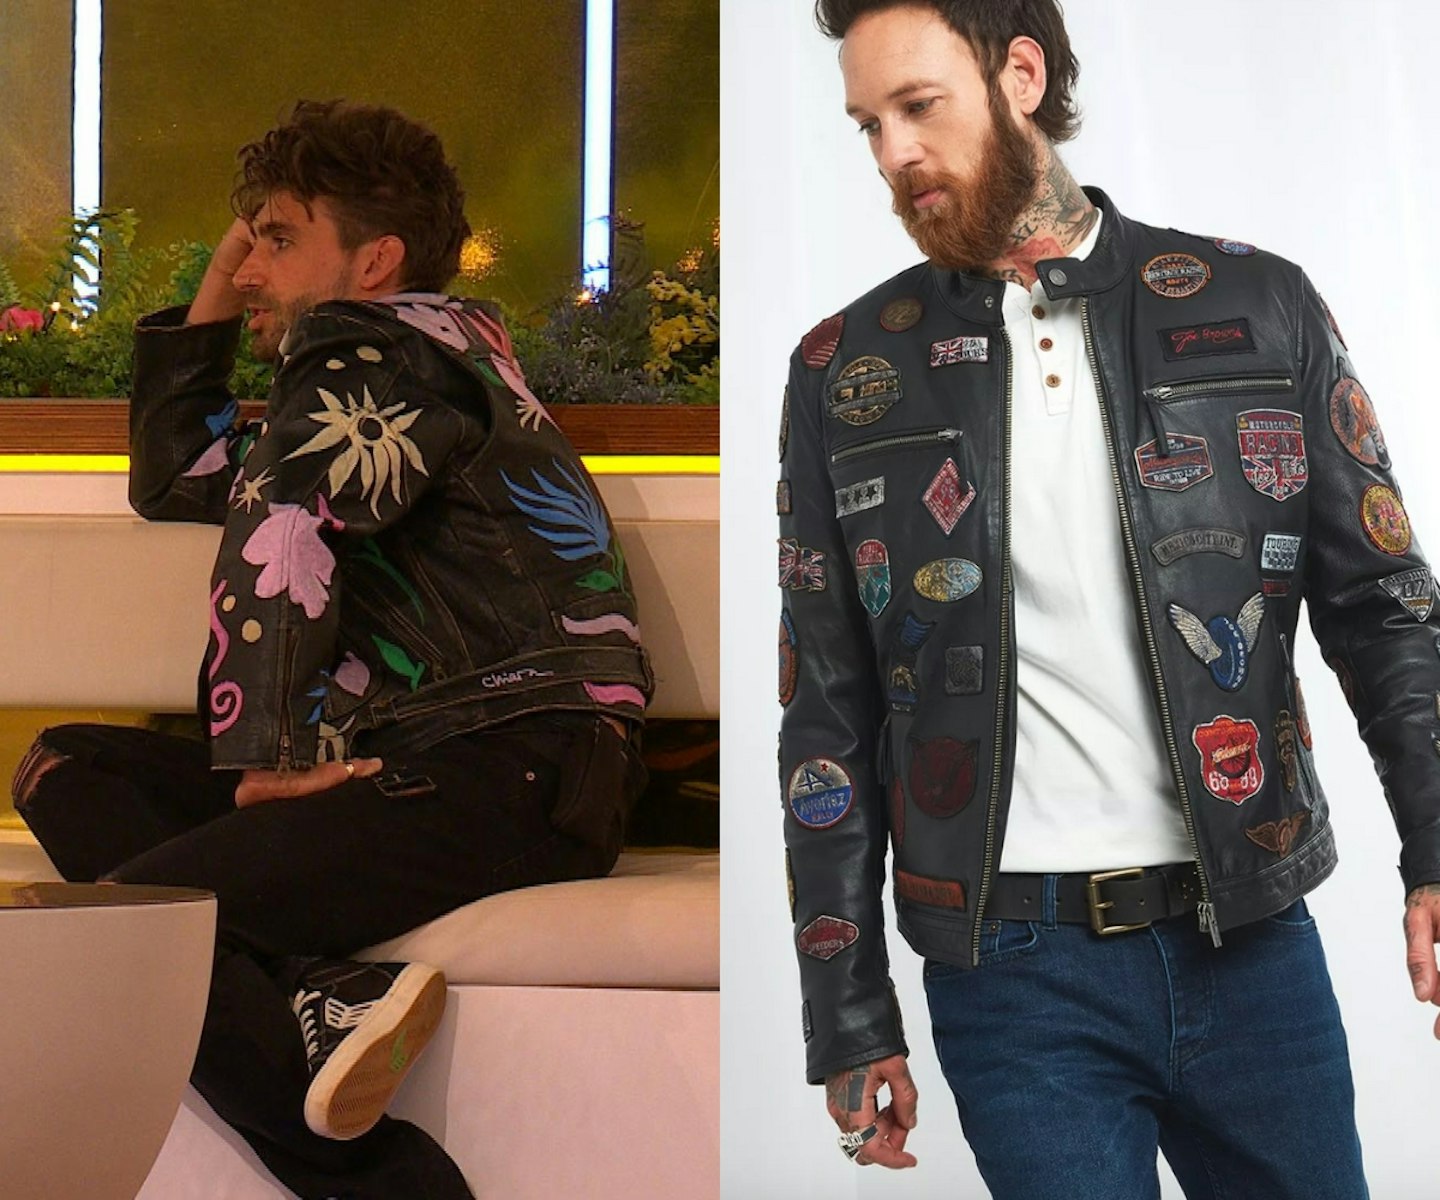 Chris' Leather Patch Jacket